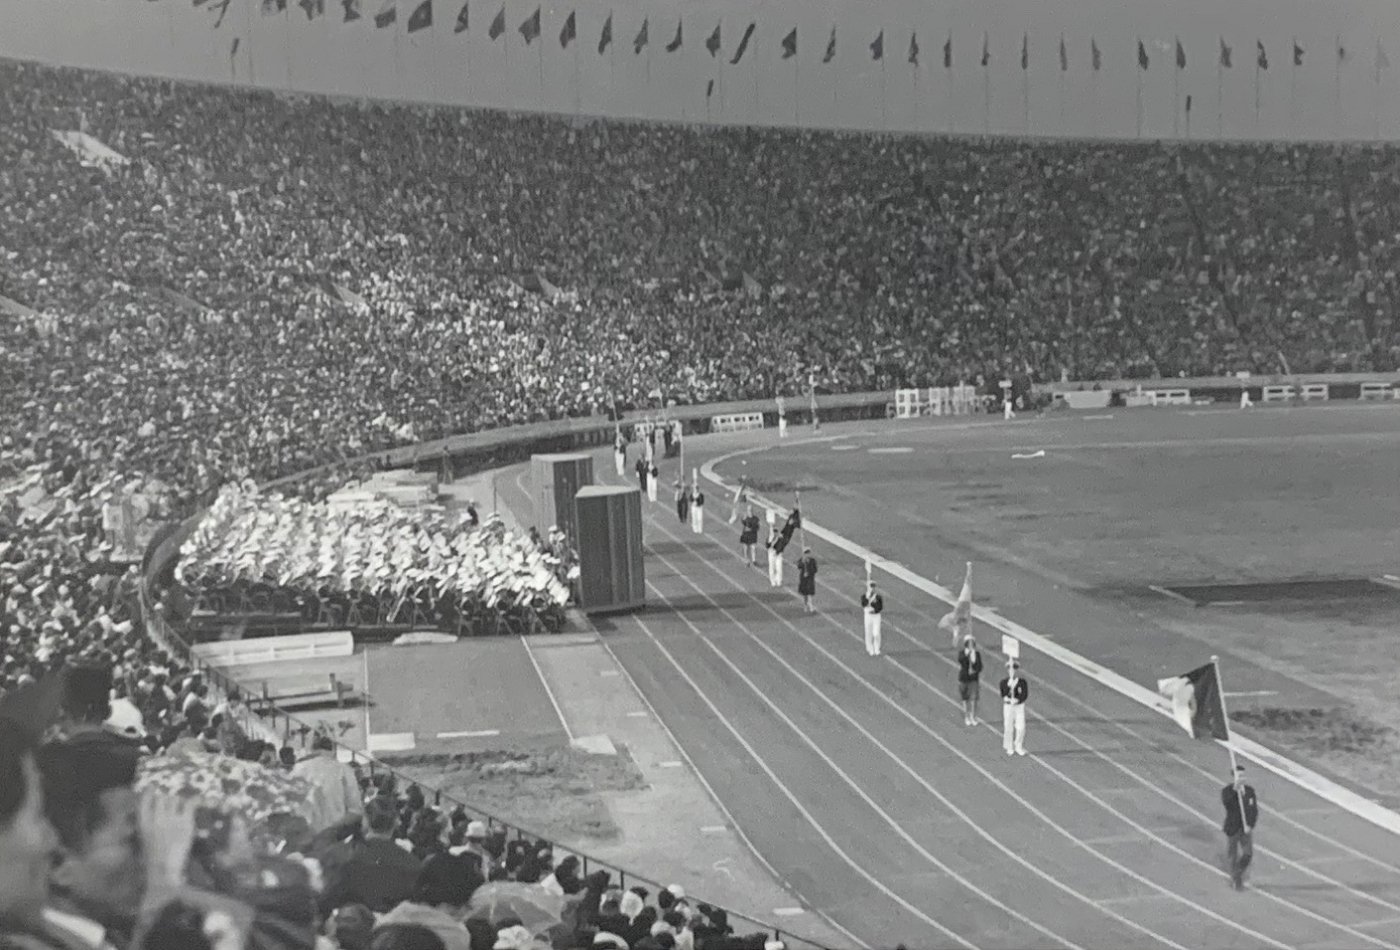 Tokyo Olympic Closing Ceremony 1964 | Source: Wikimedia Commons